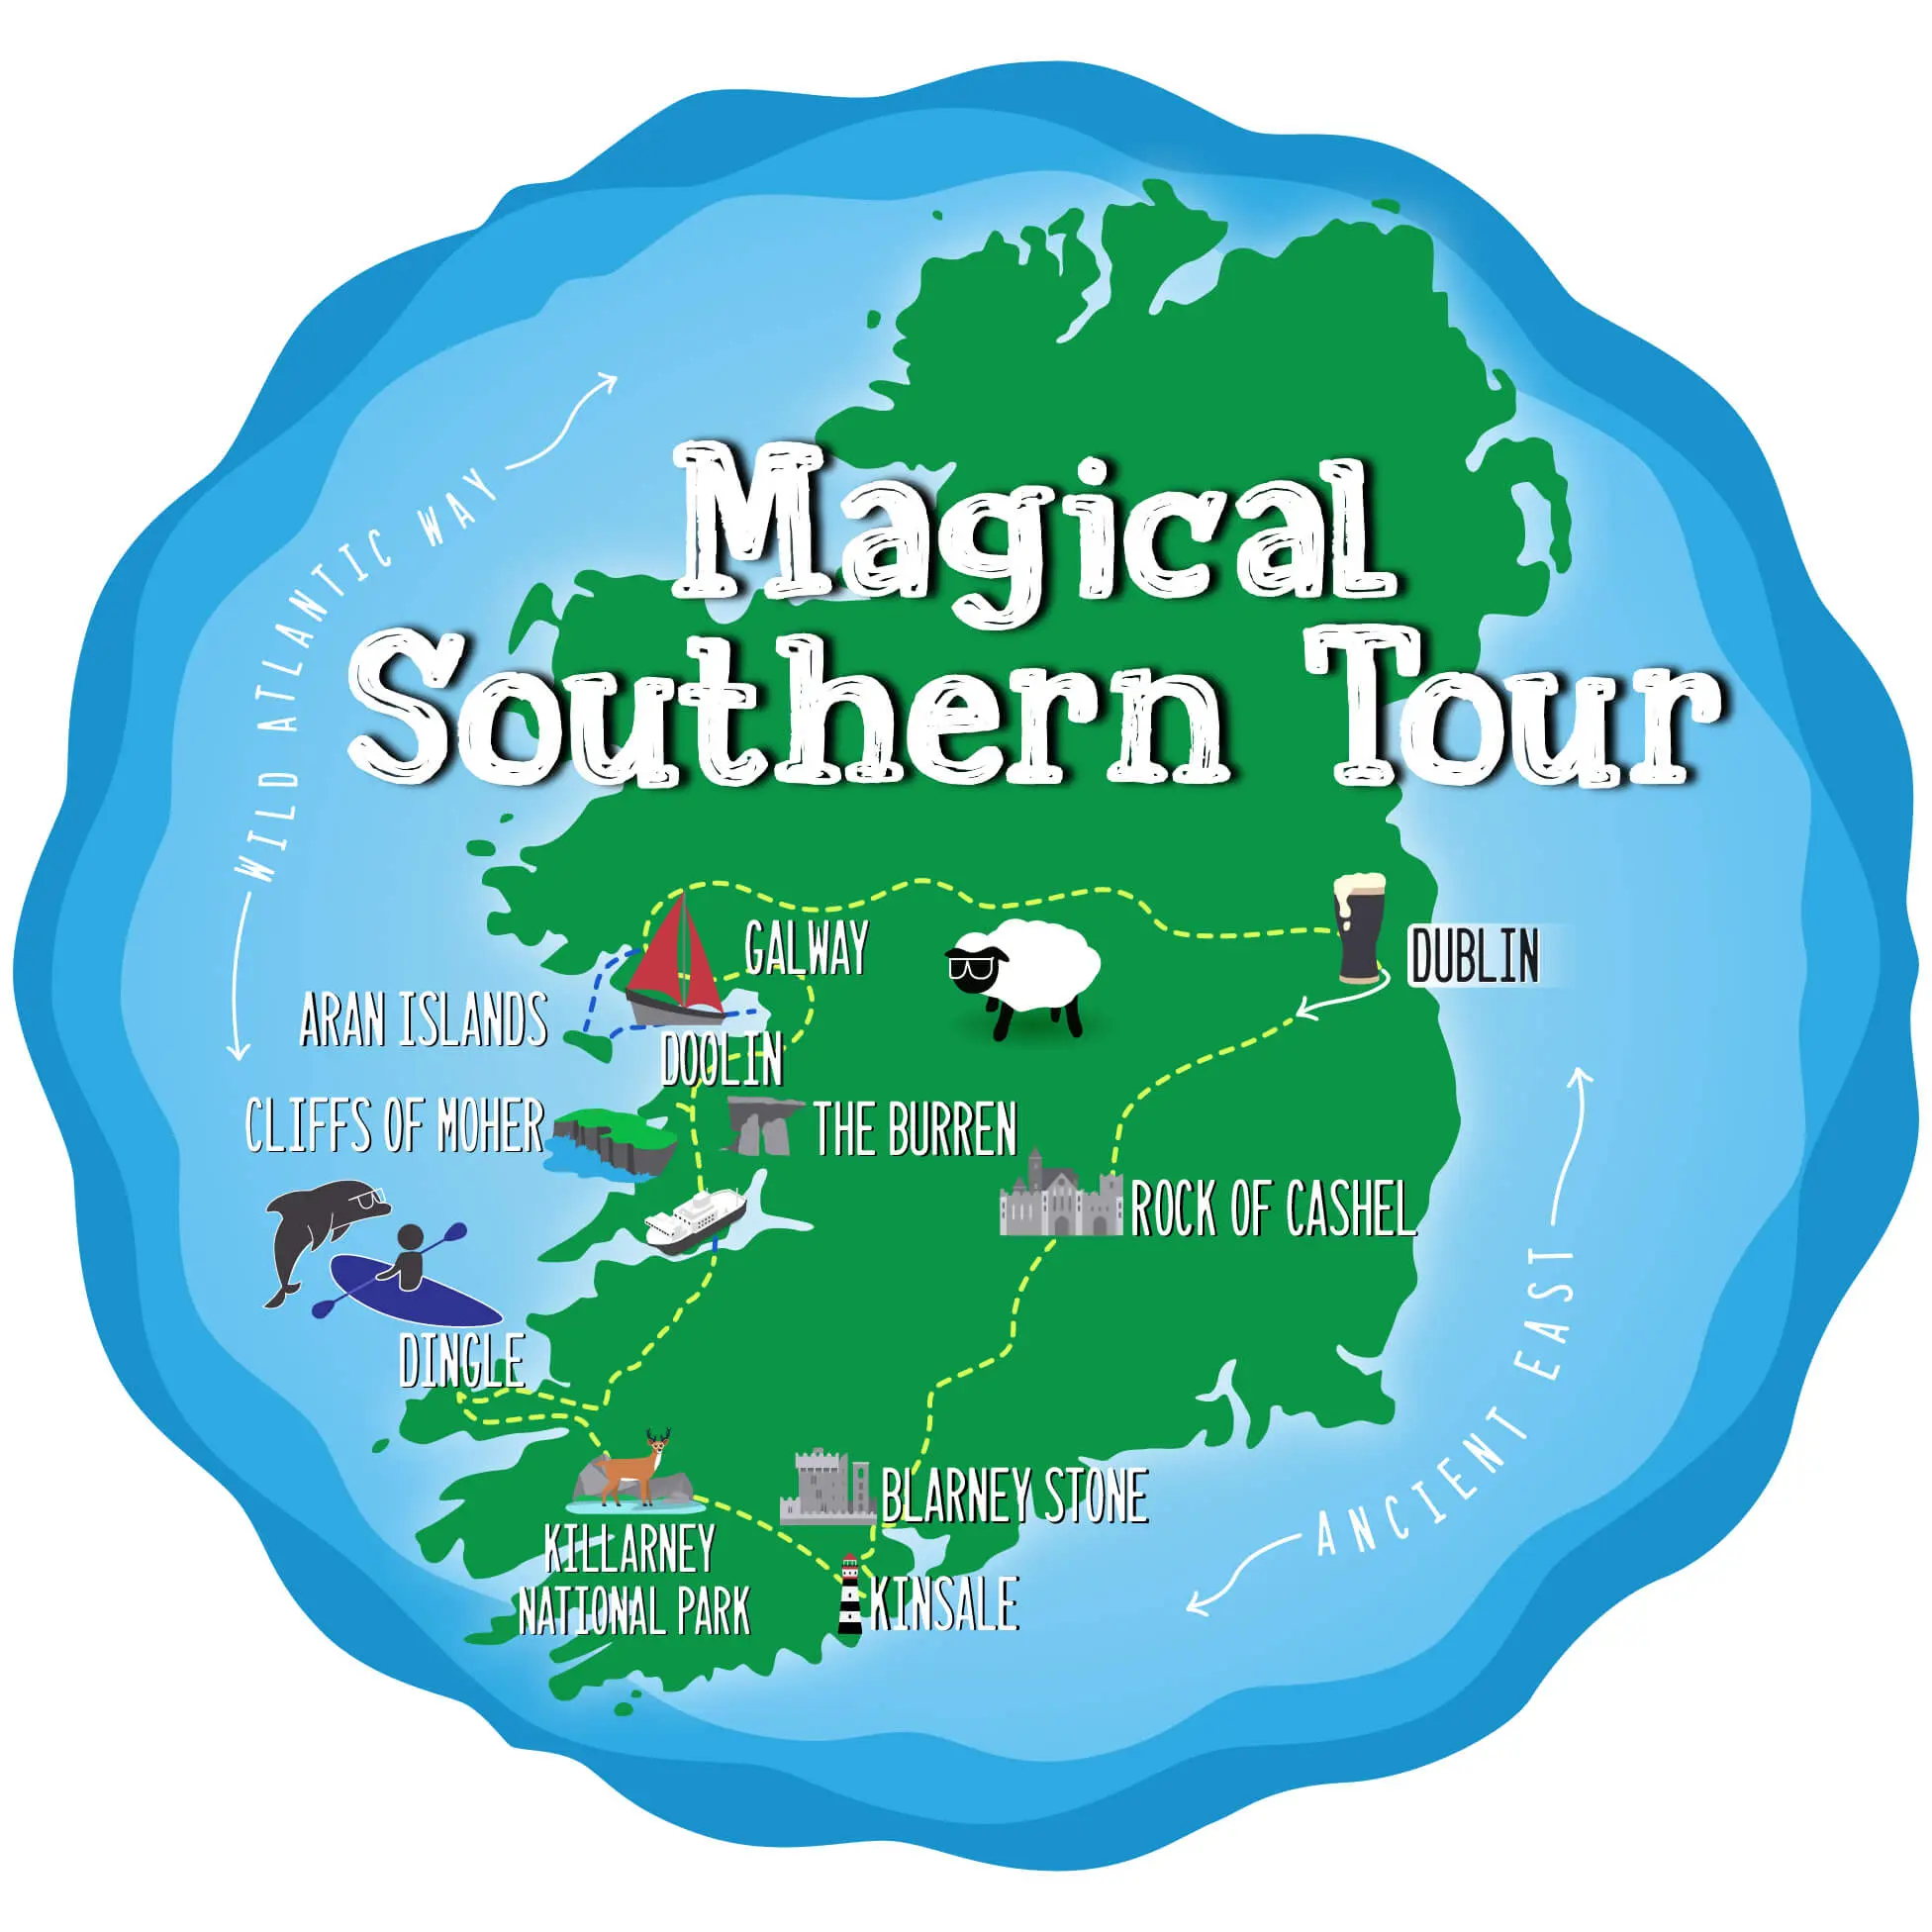 A colorful illustrated map showcasing highlights of a "magical southern tour" in Ireland, featuring key landmarks and destinations such as Dublin, the Cliffs of Moher, and the Blarney Stone,